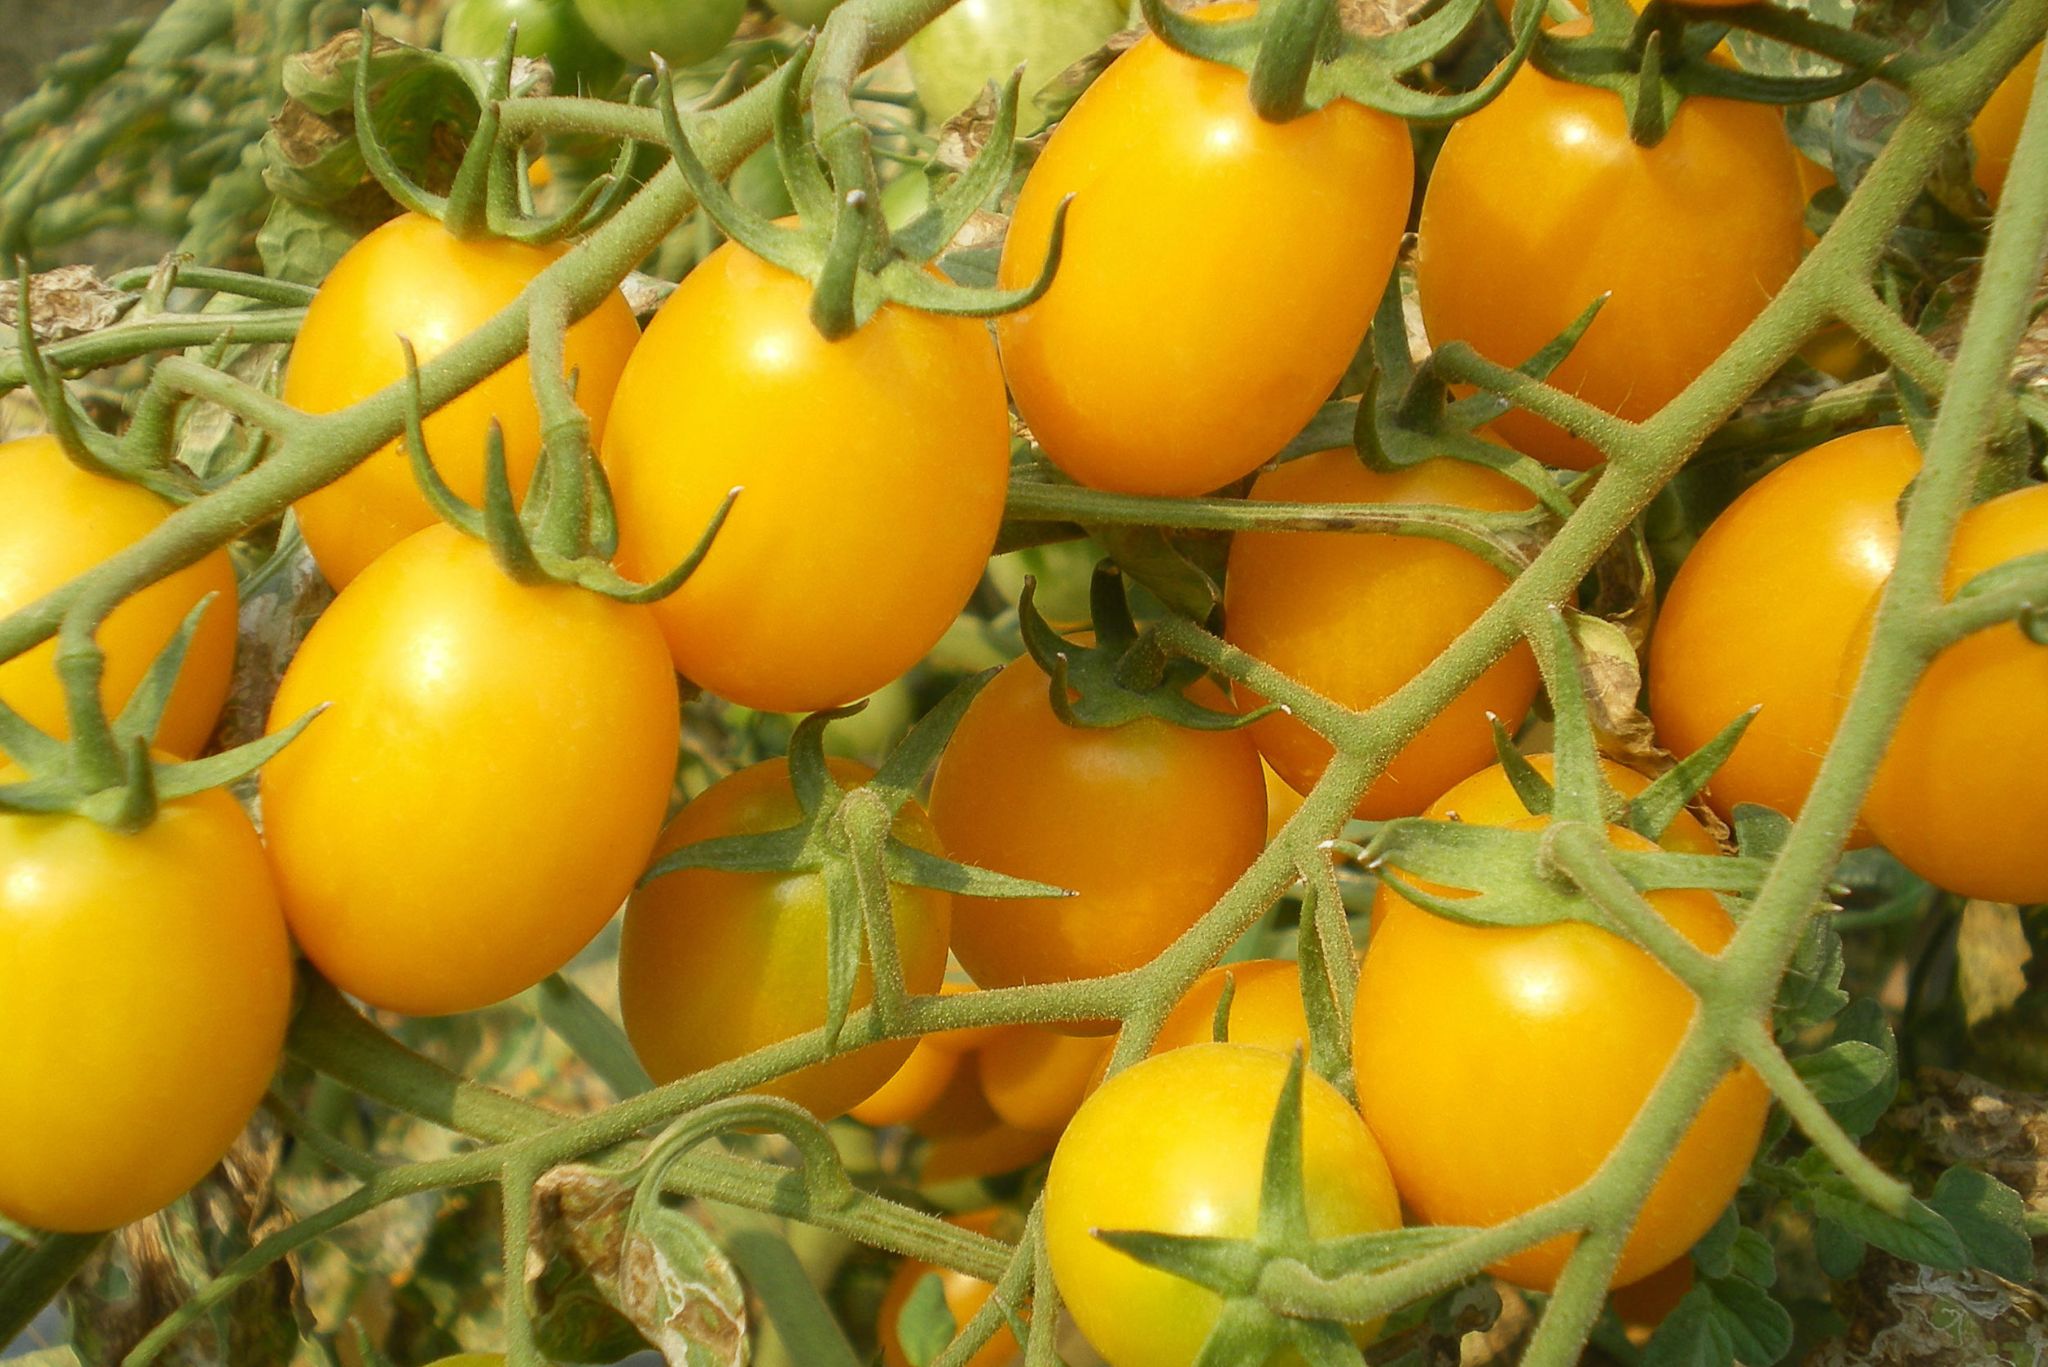 Ripe Gold nugget tomatoes on the plant